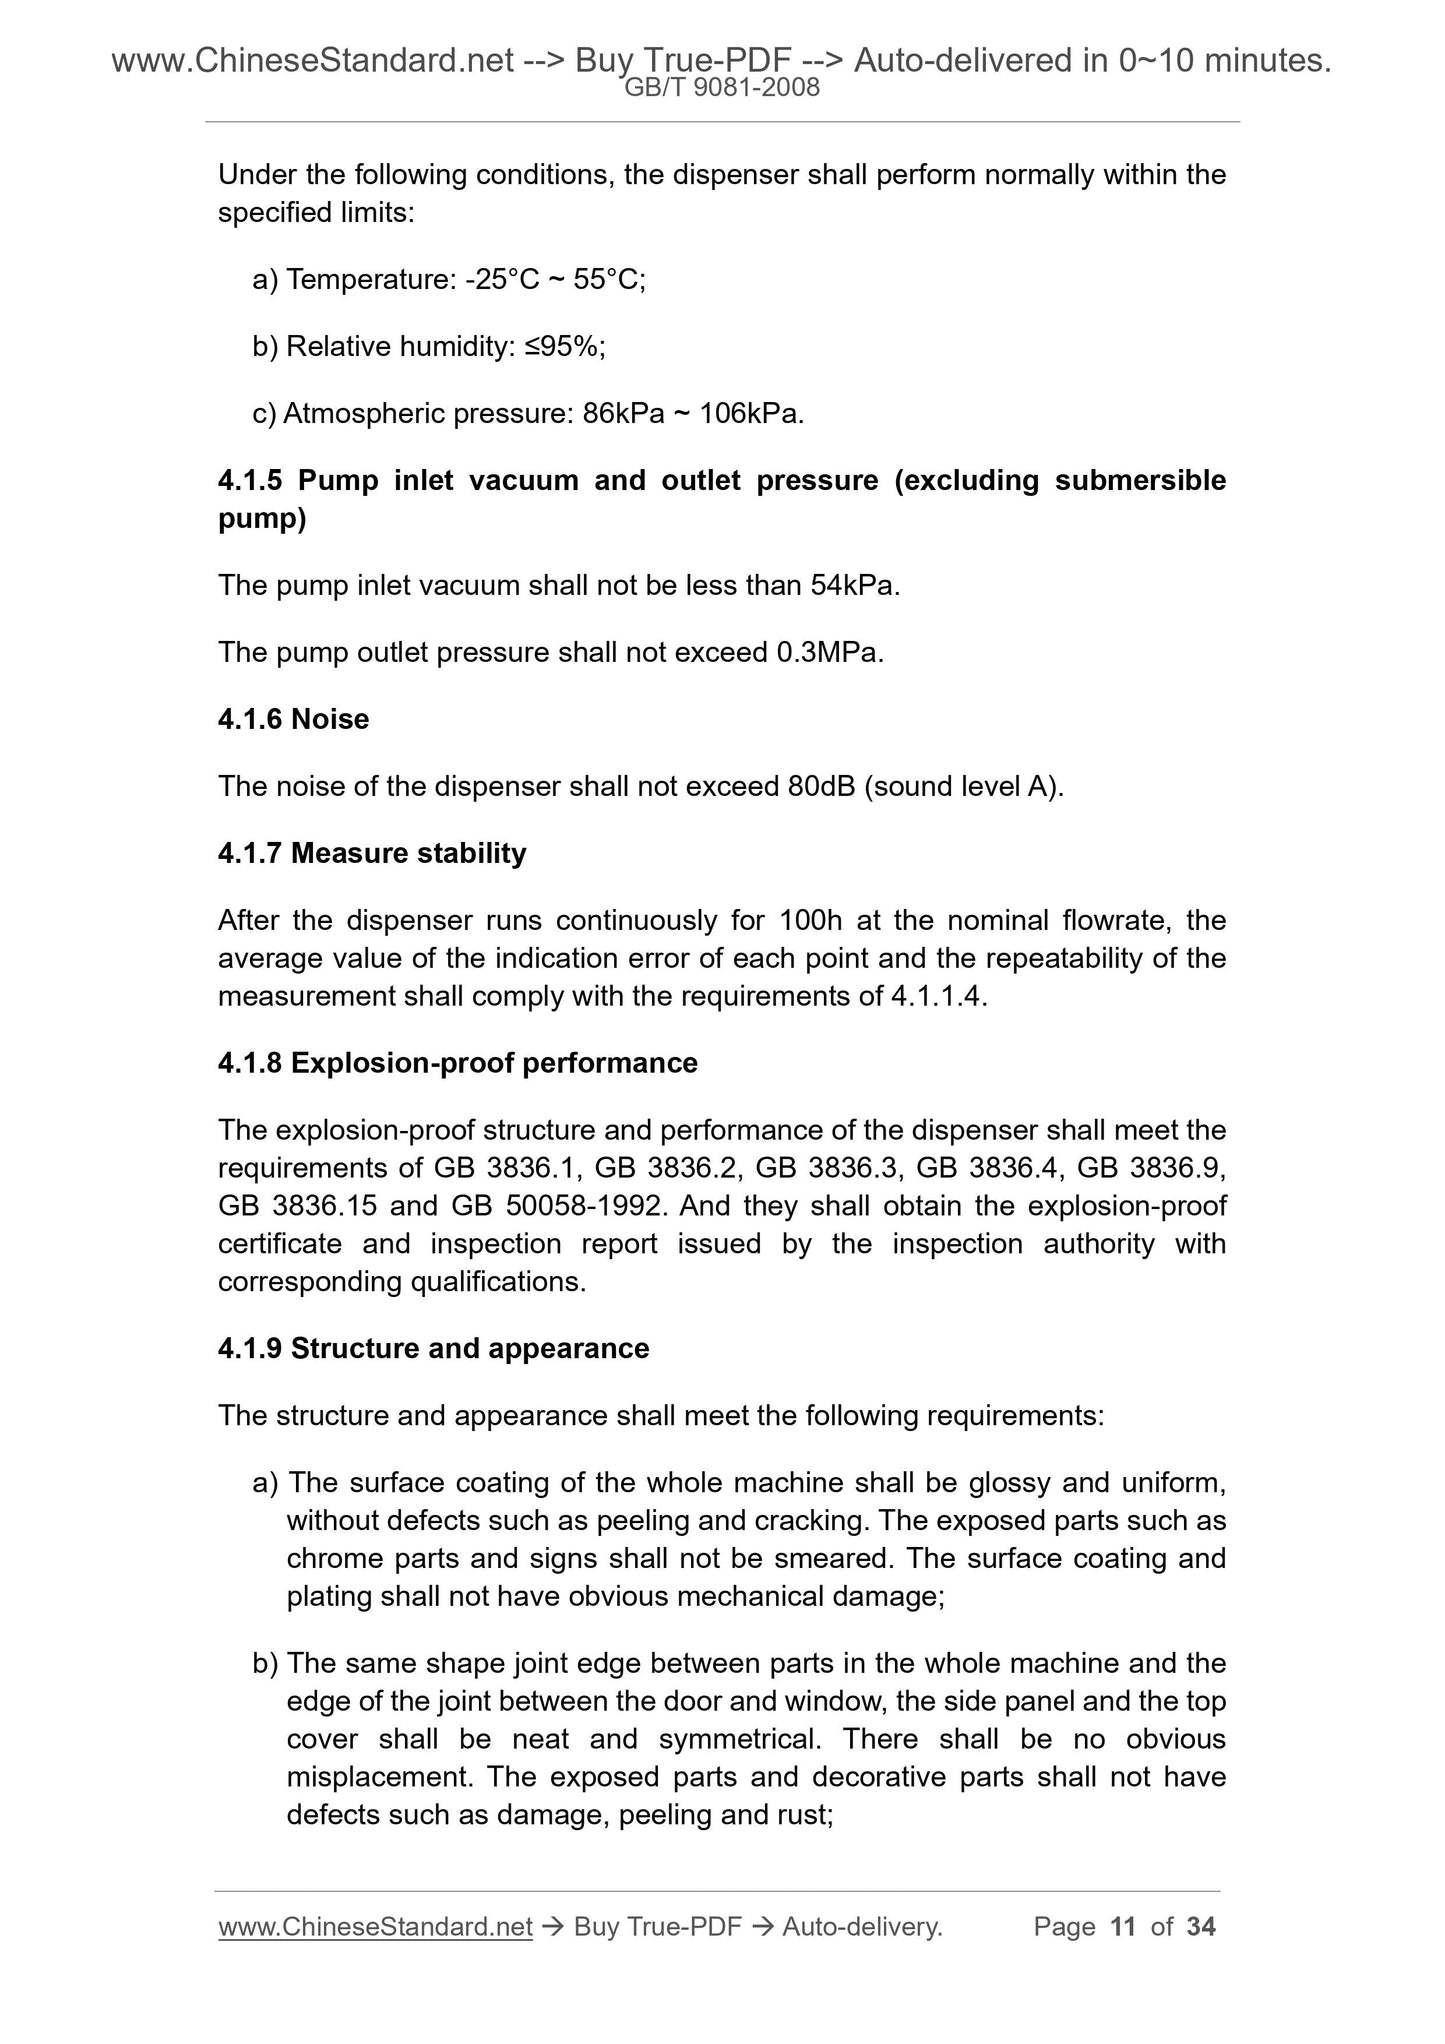 GB/T 9081-2008 Page 5